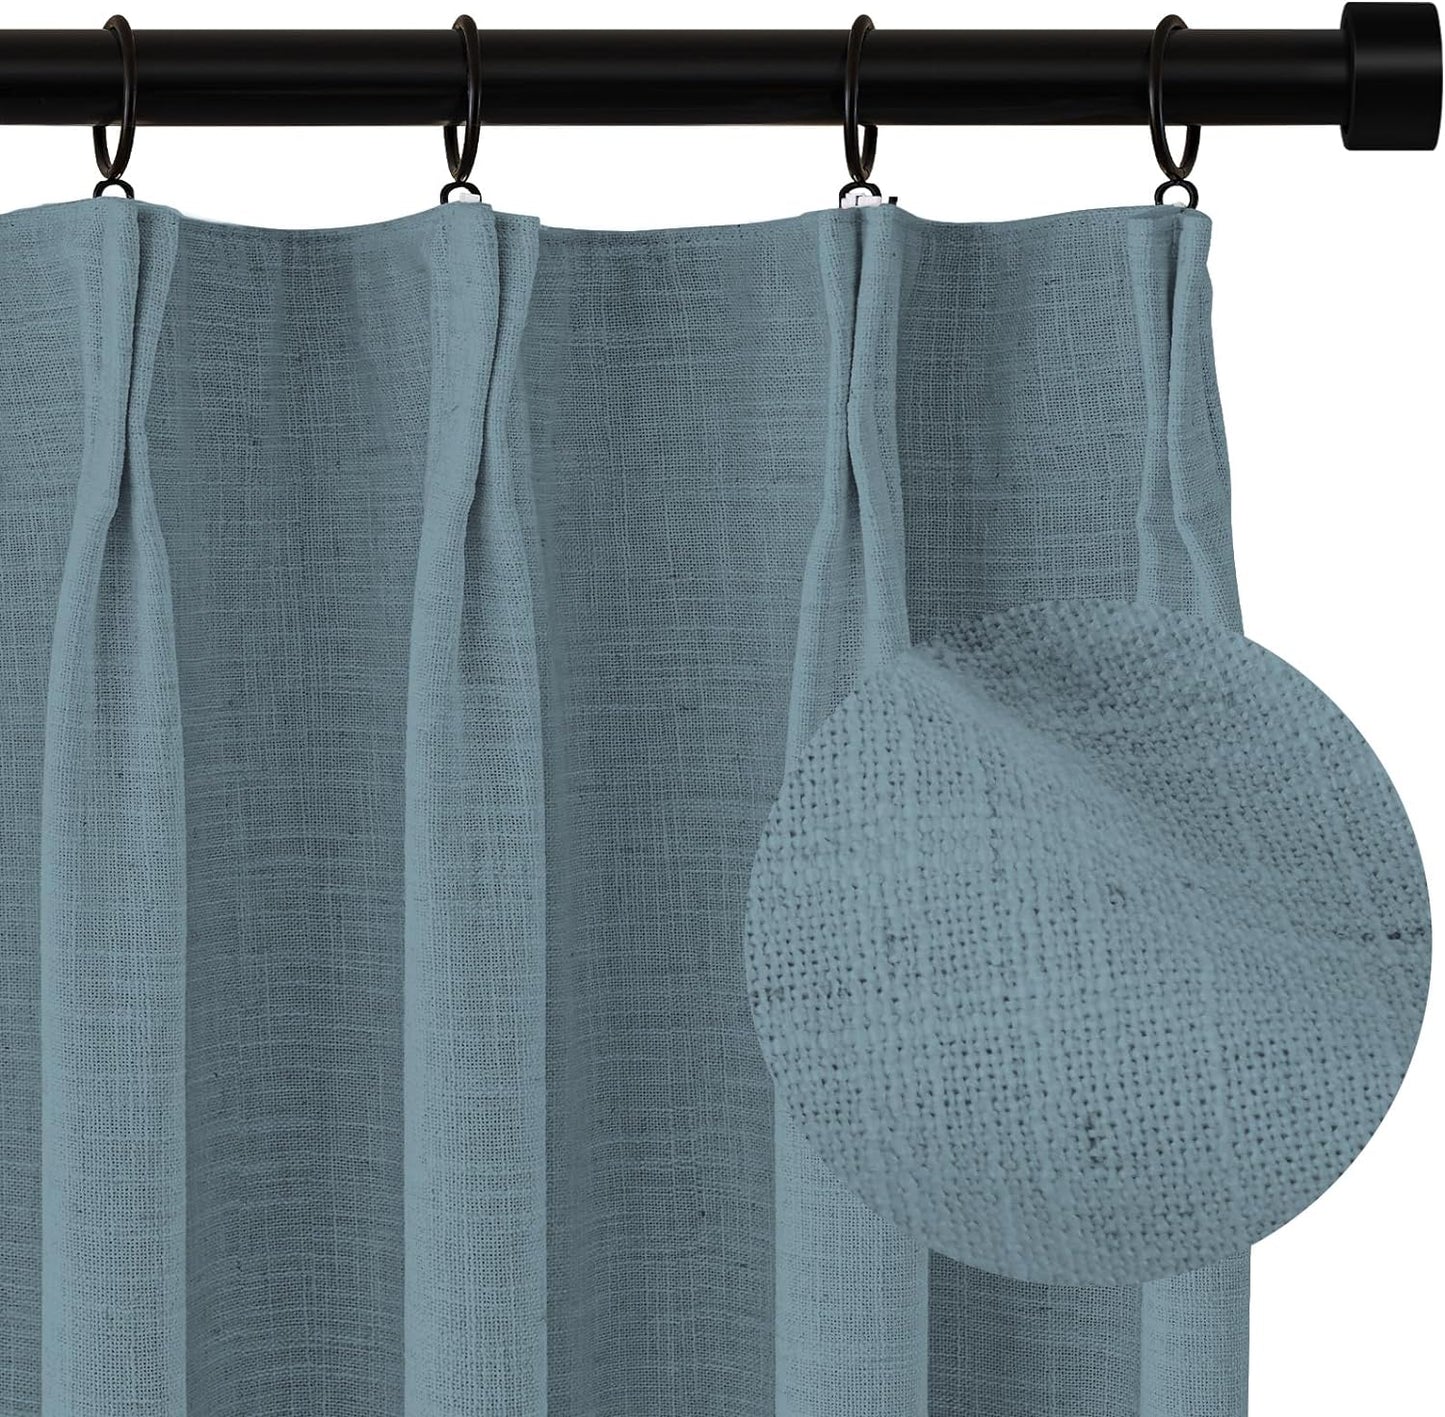 100% Blackout Shield Pinch Pleated Curtains 96 Inches Long, 100% Blackout Curtains for Bedroom/Living Room, Linen Blackout Curtains with Liner, Thermal Insulated Drapes,W40Xl96,Beige White  100% Blackout Shield Sea Green 40''W X 84''L 